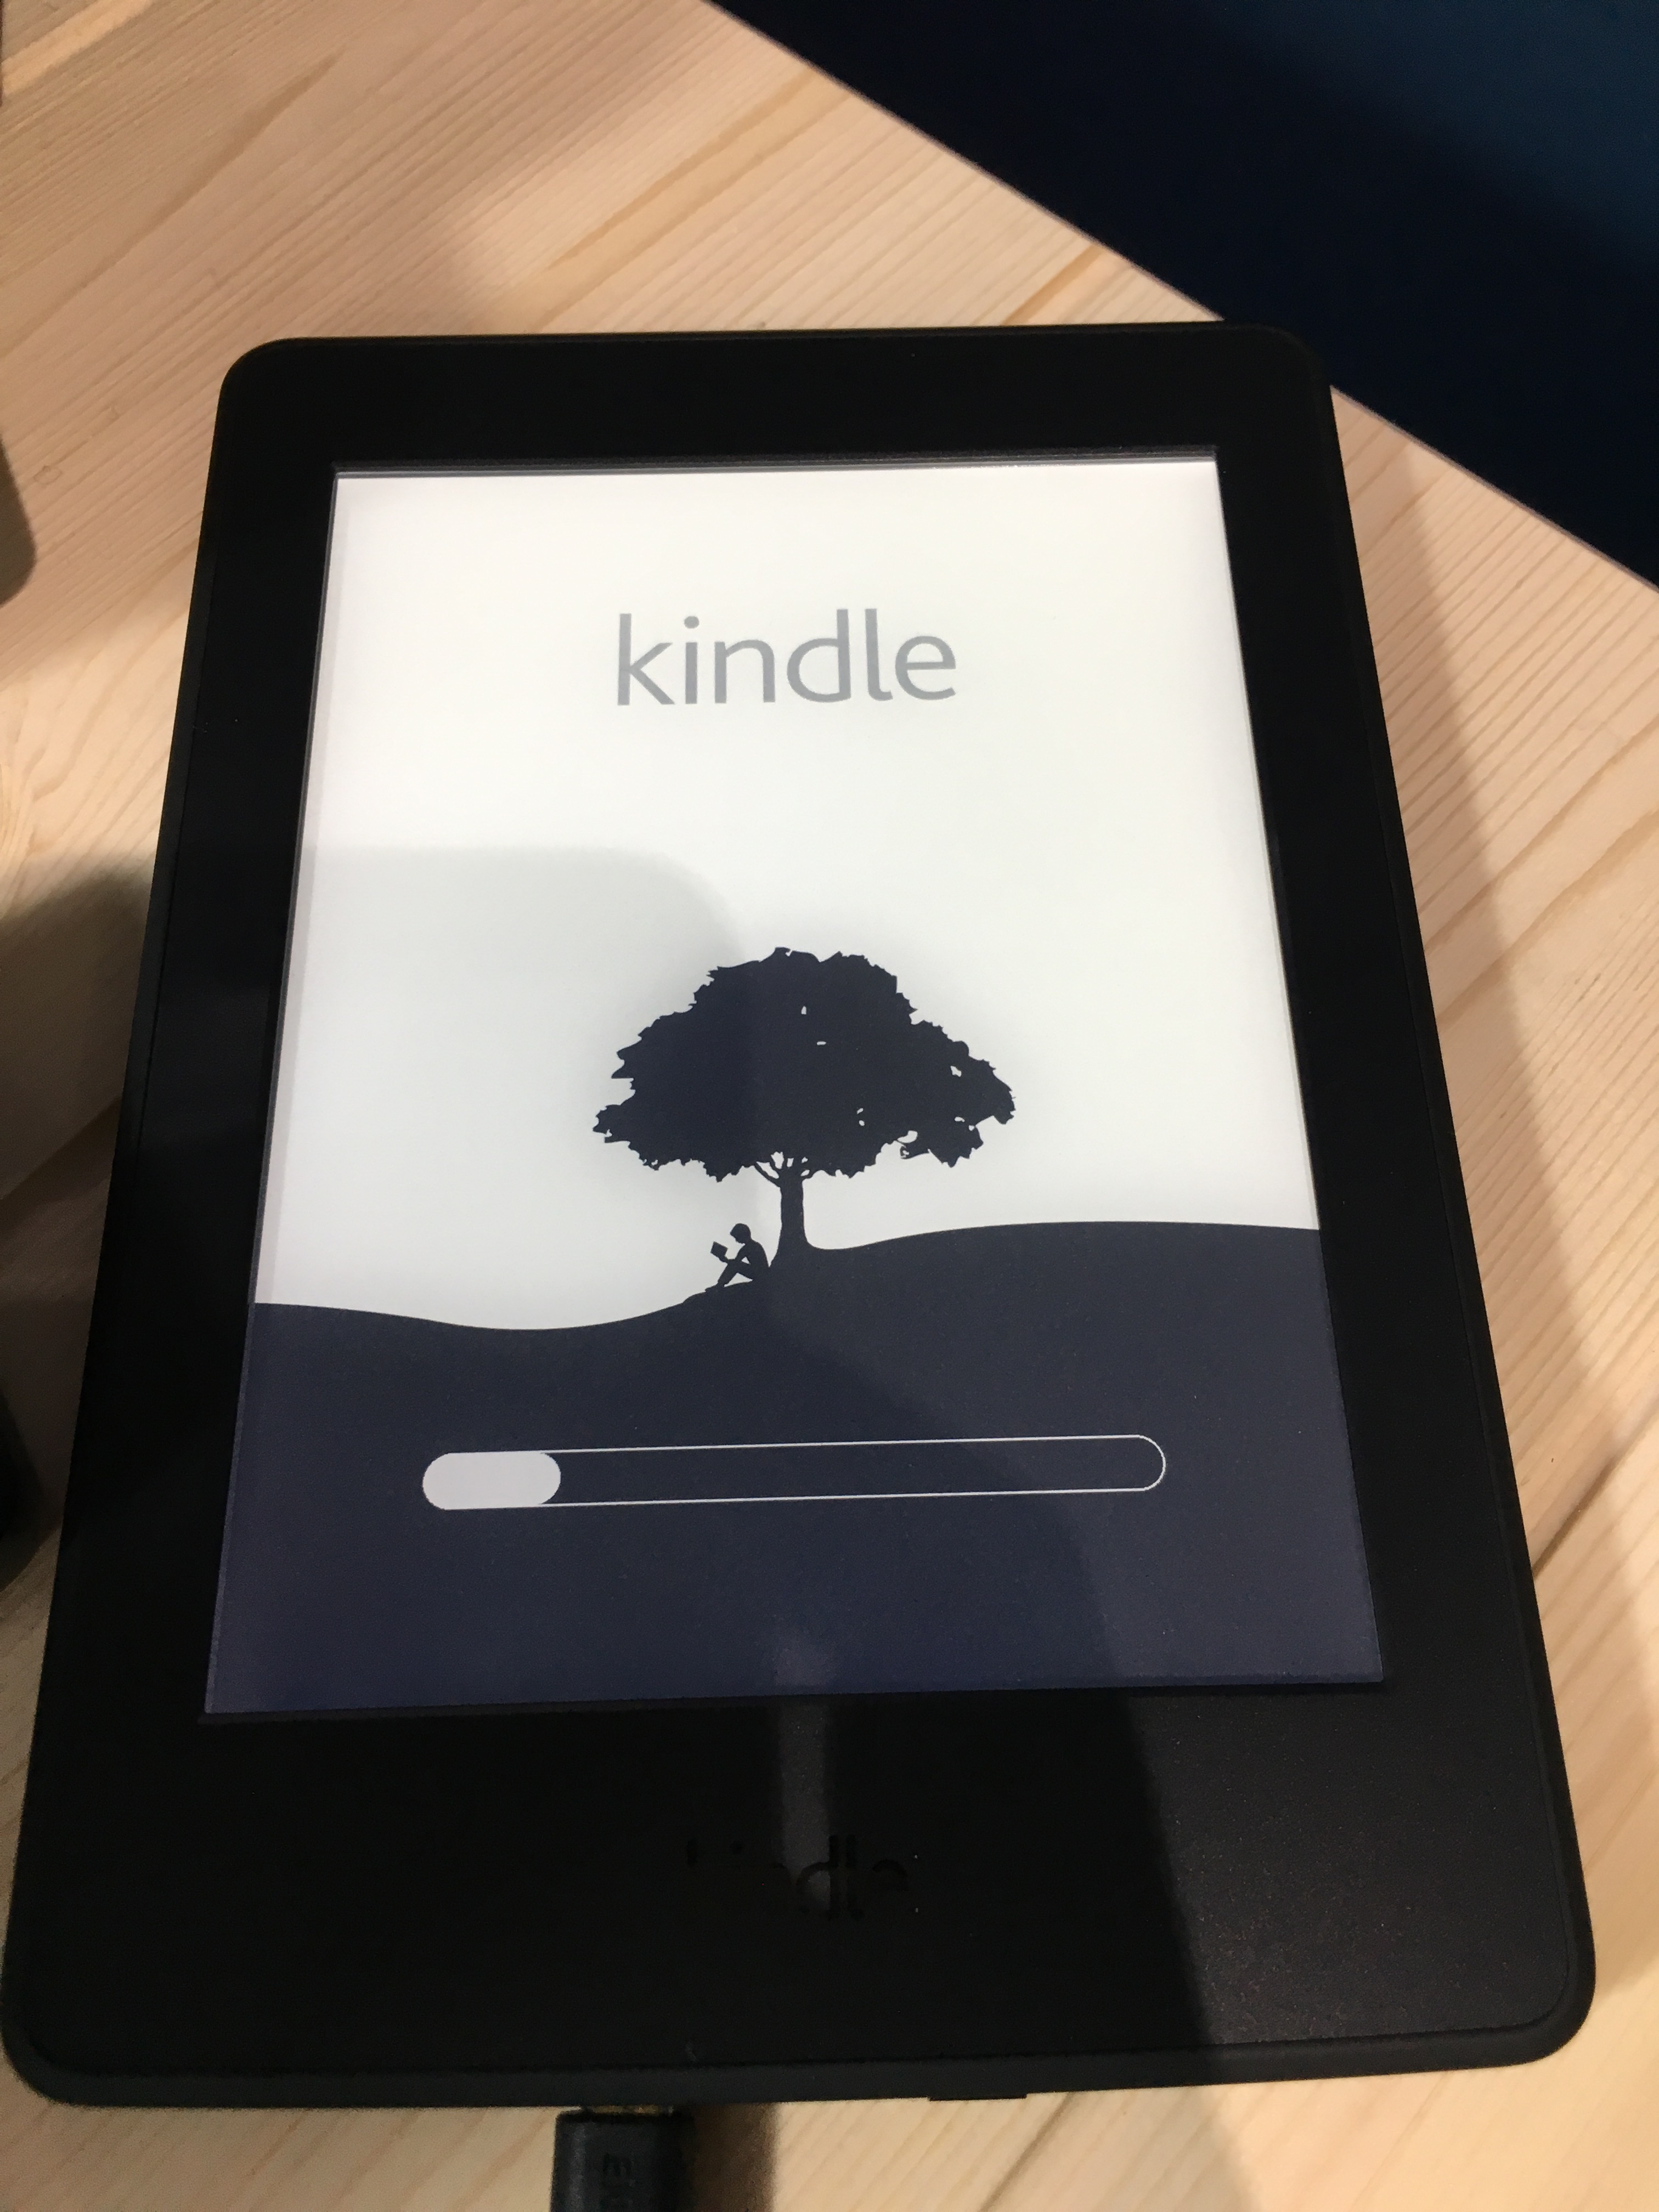 Kindle Paperwhiteマンガモデル開封します！】 | Ken Total Consulting 